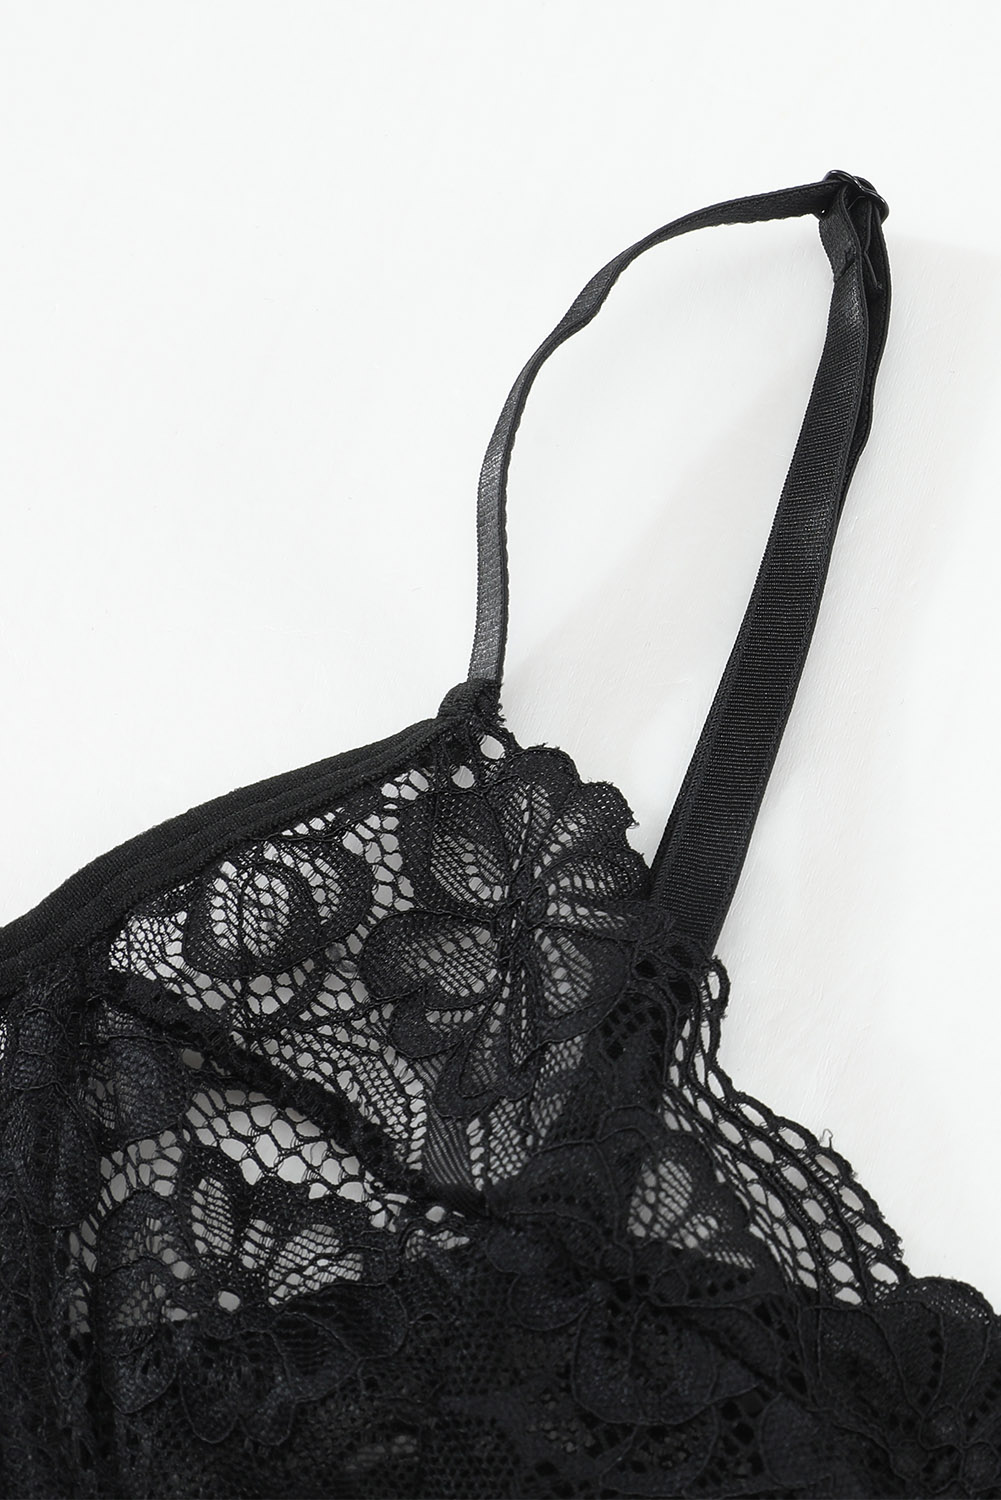 US$ 4.37 Drop-shipping Black Blossom Balcony&Thong for Women